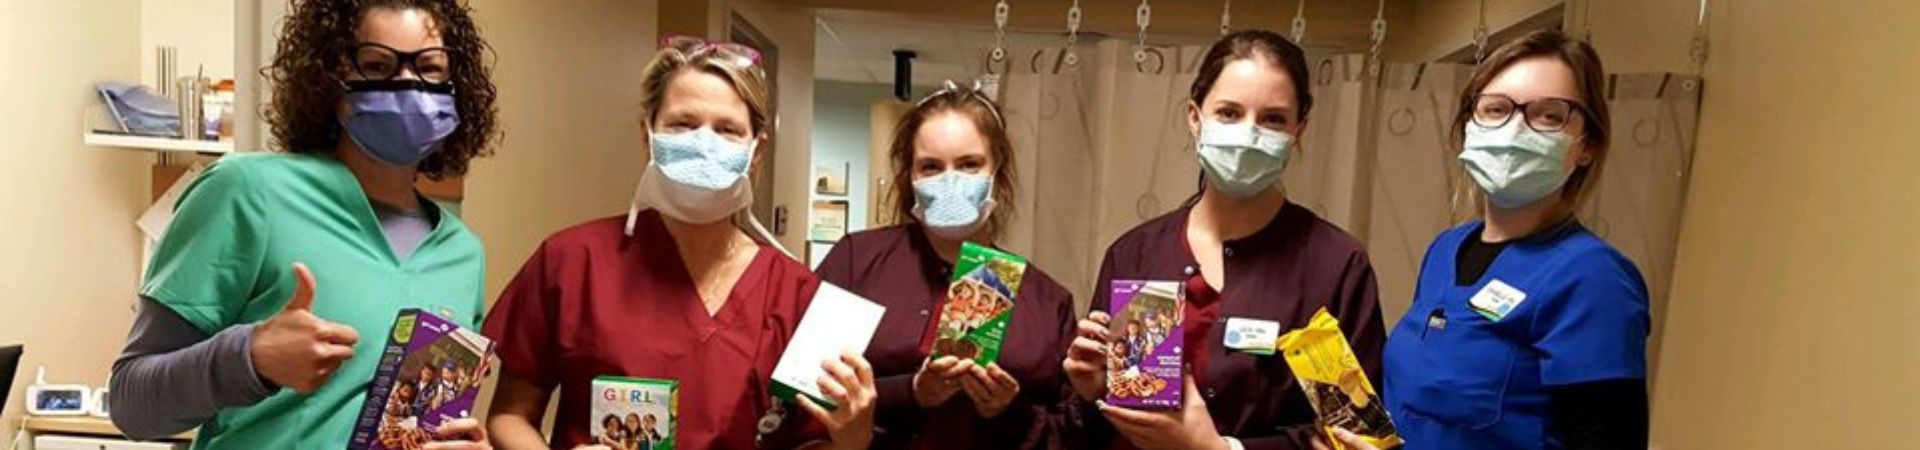  York Hospital's Medical Surgical COVID-19 Unit workers holding donated Girl Scout Cookies 